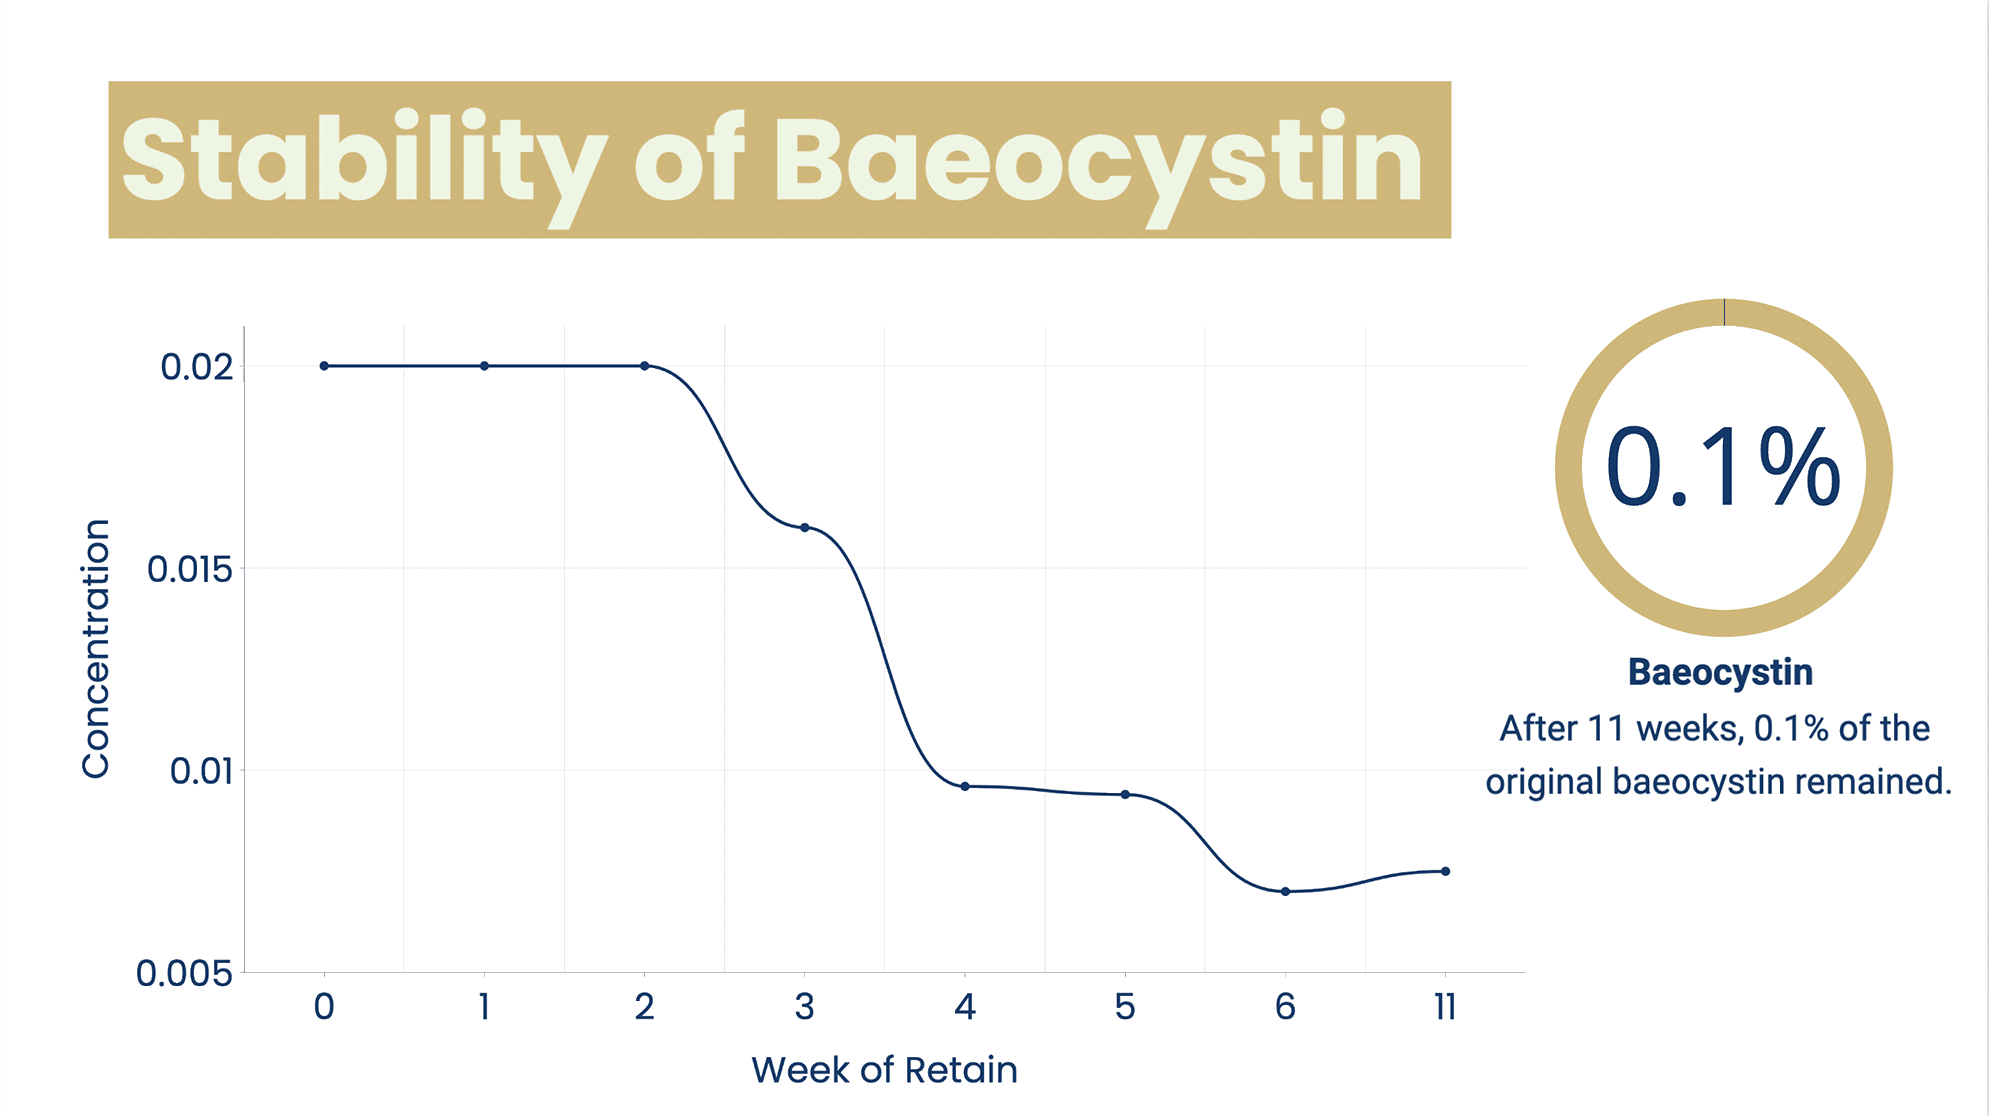 This is a graph showing the stability of baeocystin over the course of our 11 week study.